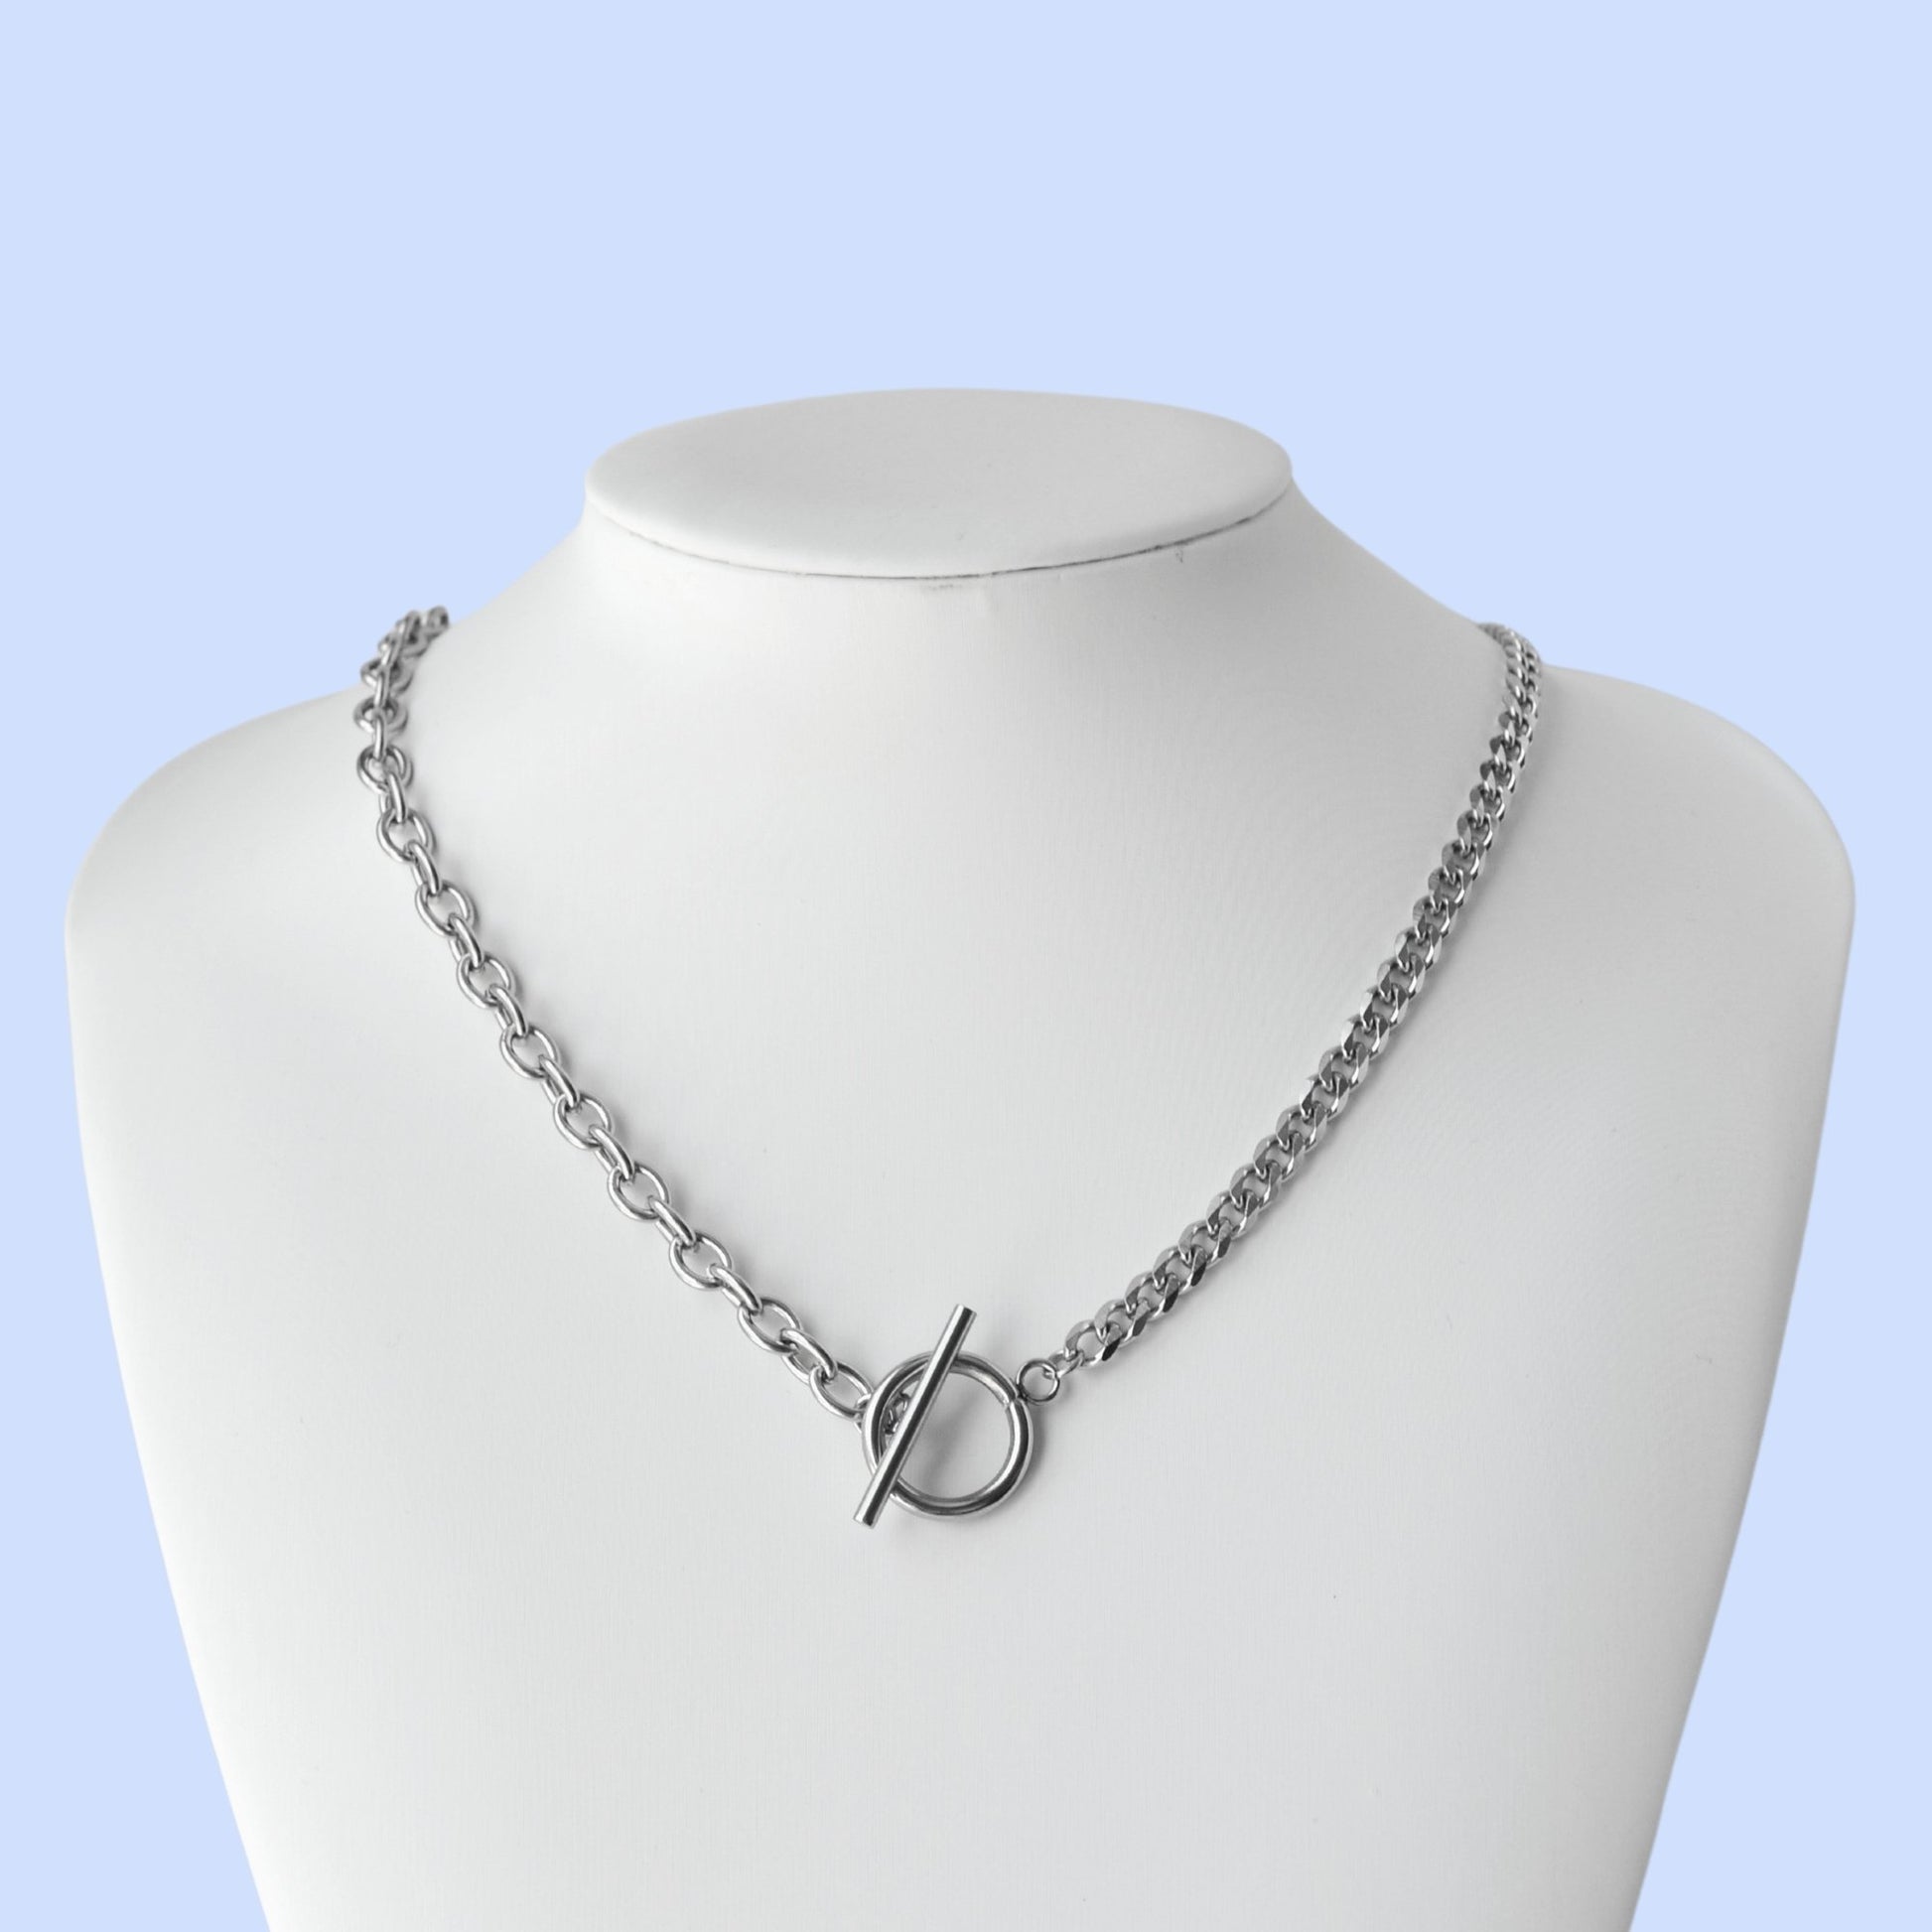 Chunky Silver Double Chain Toggle Necklace For Women or Men - Necklace - Boutique Wear RENN